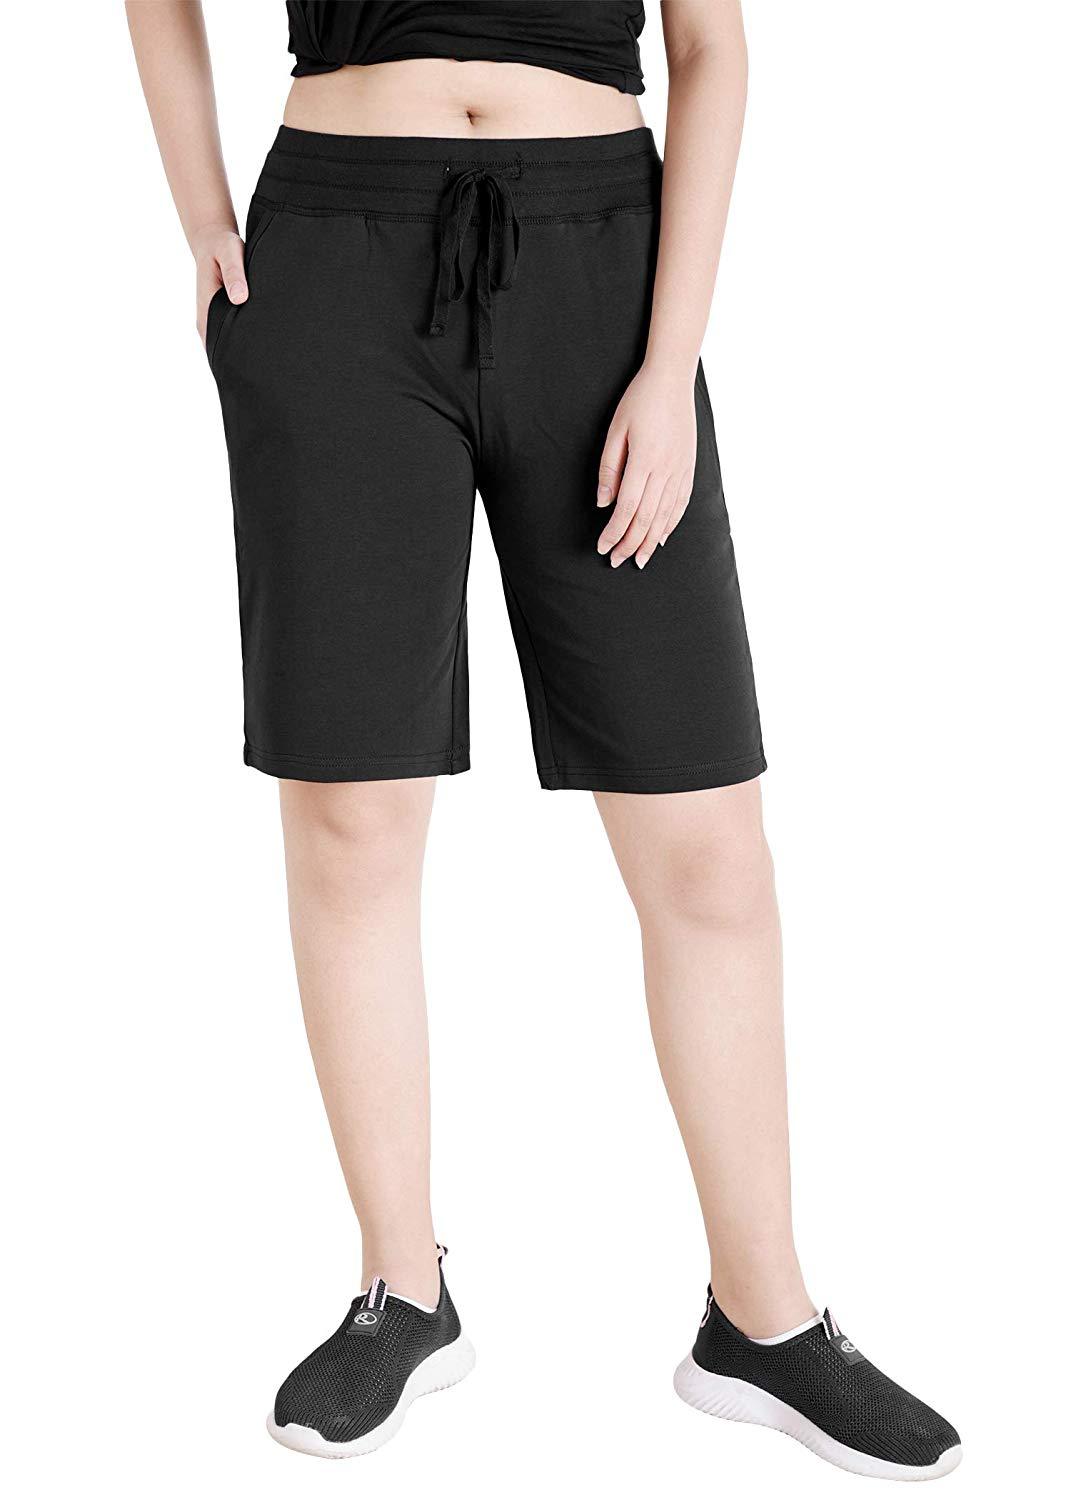 women's jersey shorts with pockets